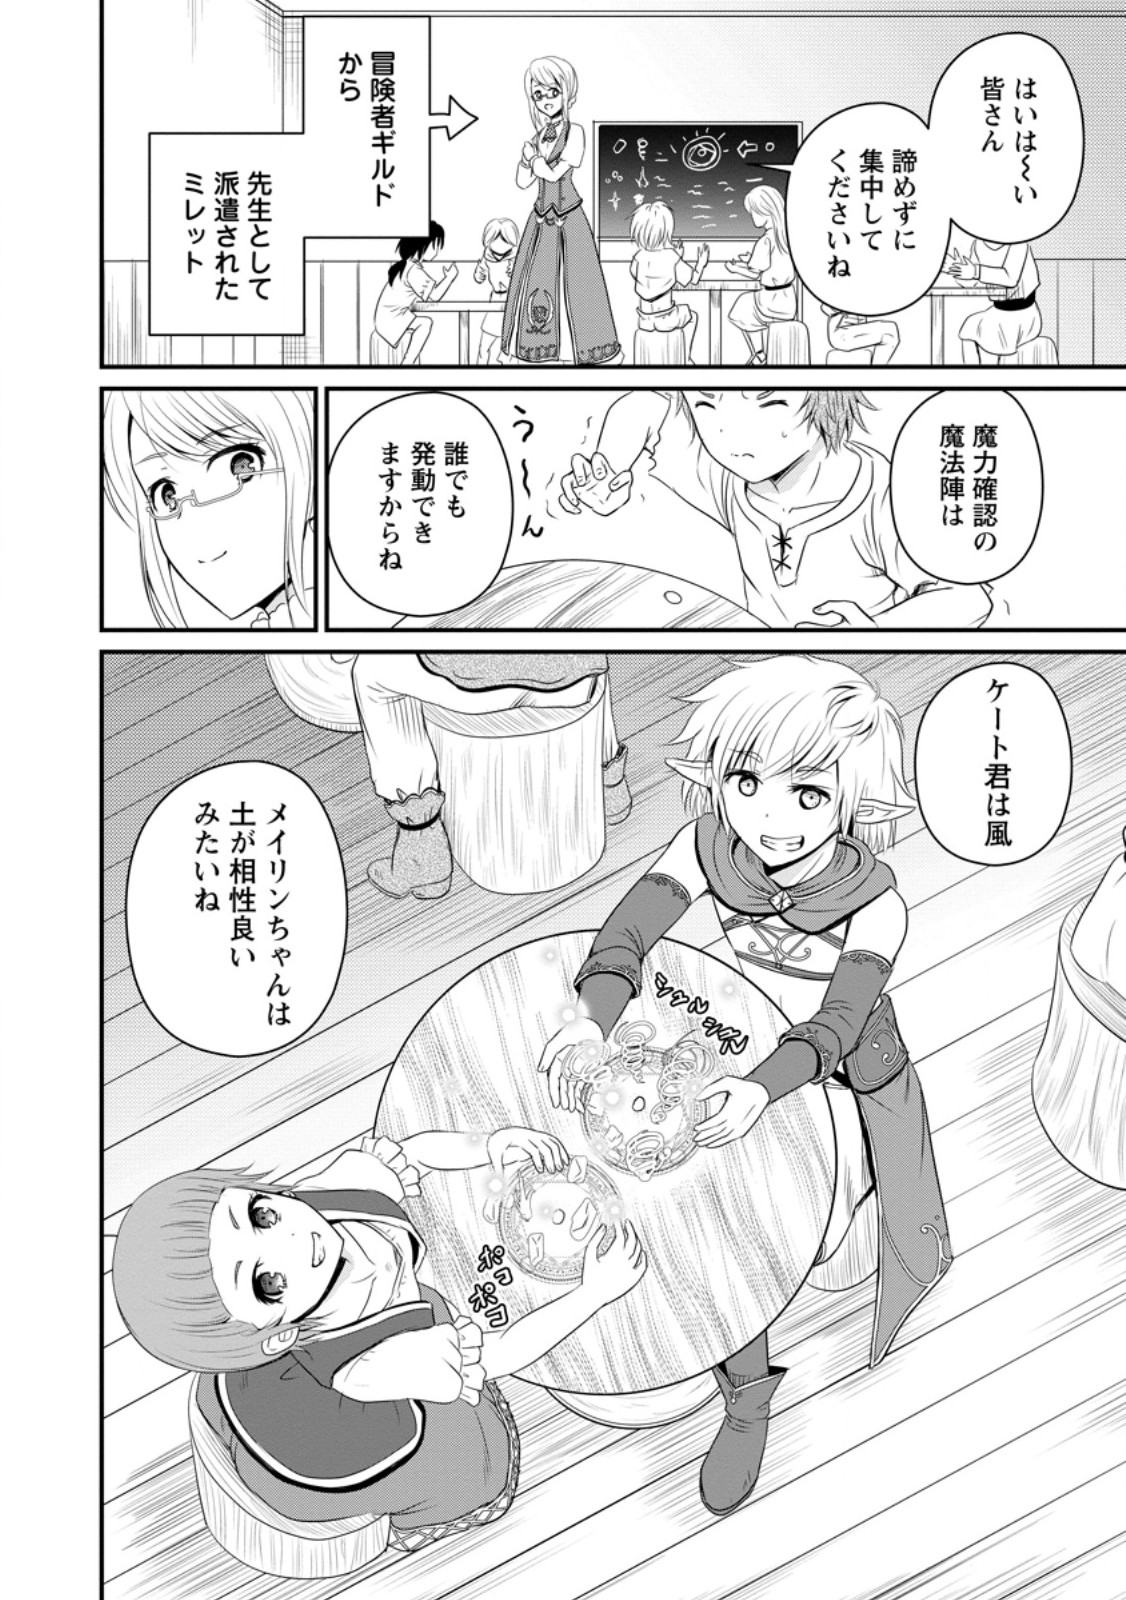 The Frontier Life of The Low-Class Ossan Healer And The Lovery Girl - Chapter 46.1 - Page 1